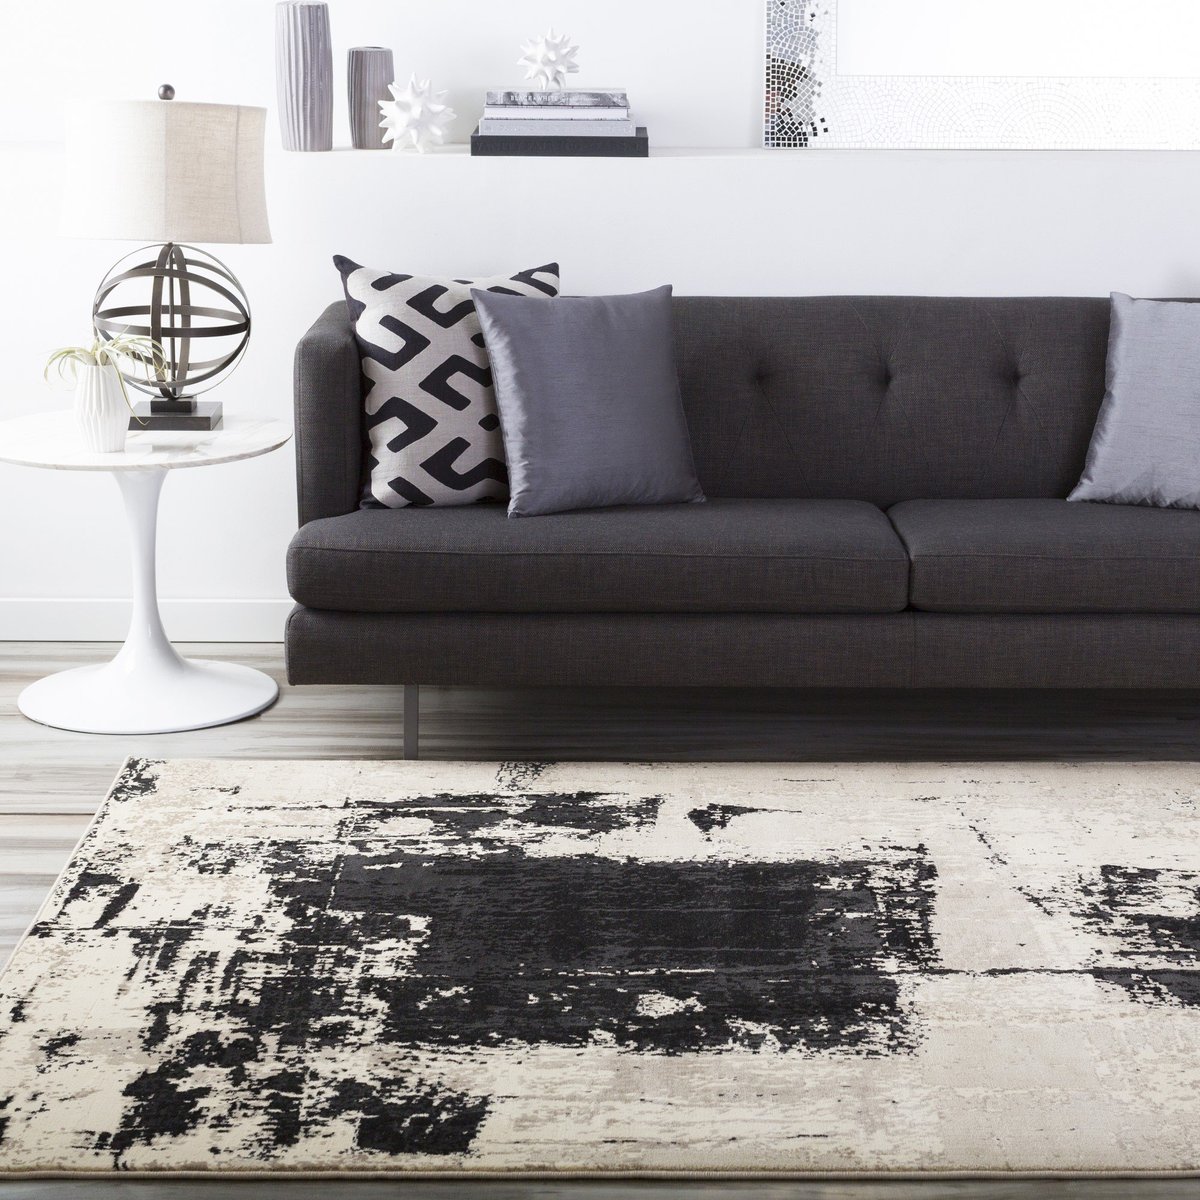 Accentuating the Negative - Black and White Living Room Design Advice